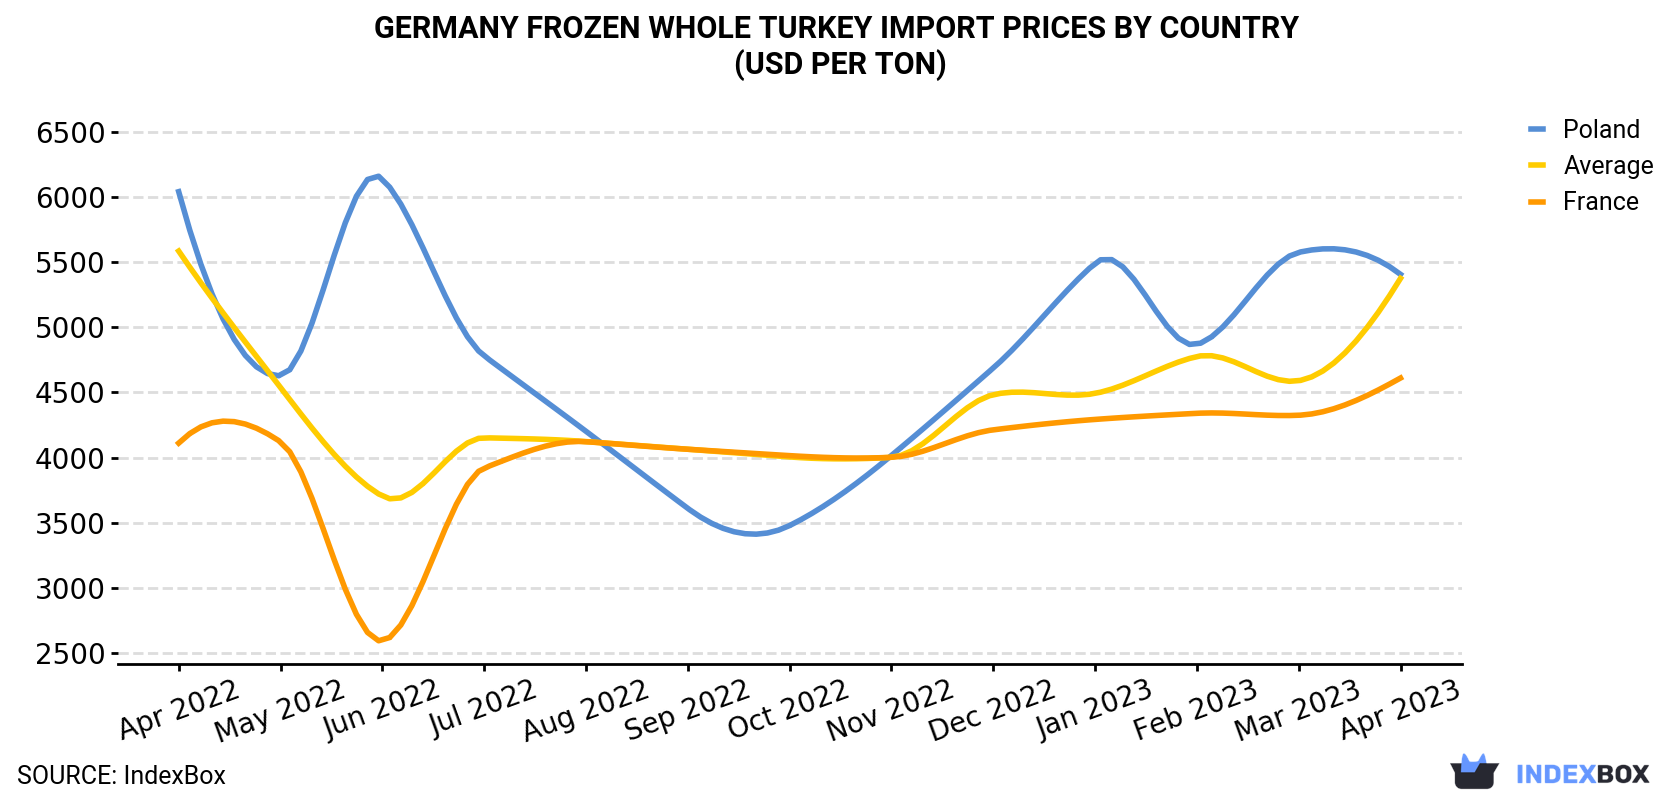 Germany Frozen Whole Turkey Import Prices By Country (USD Per Ton)